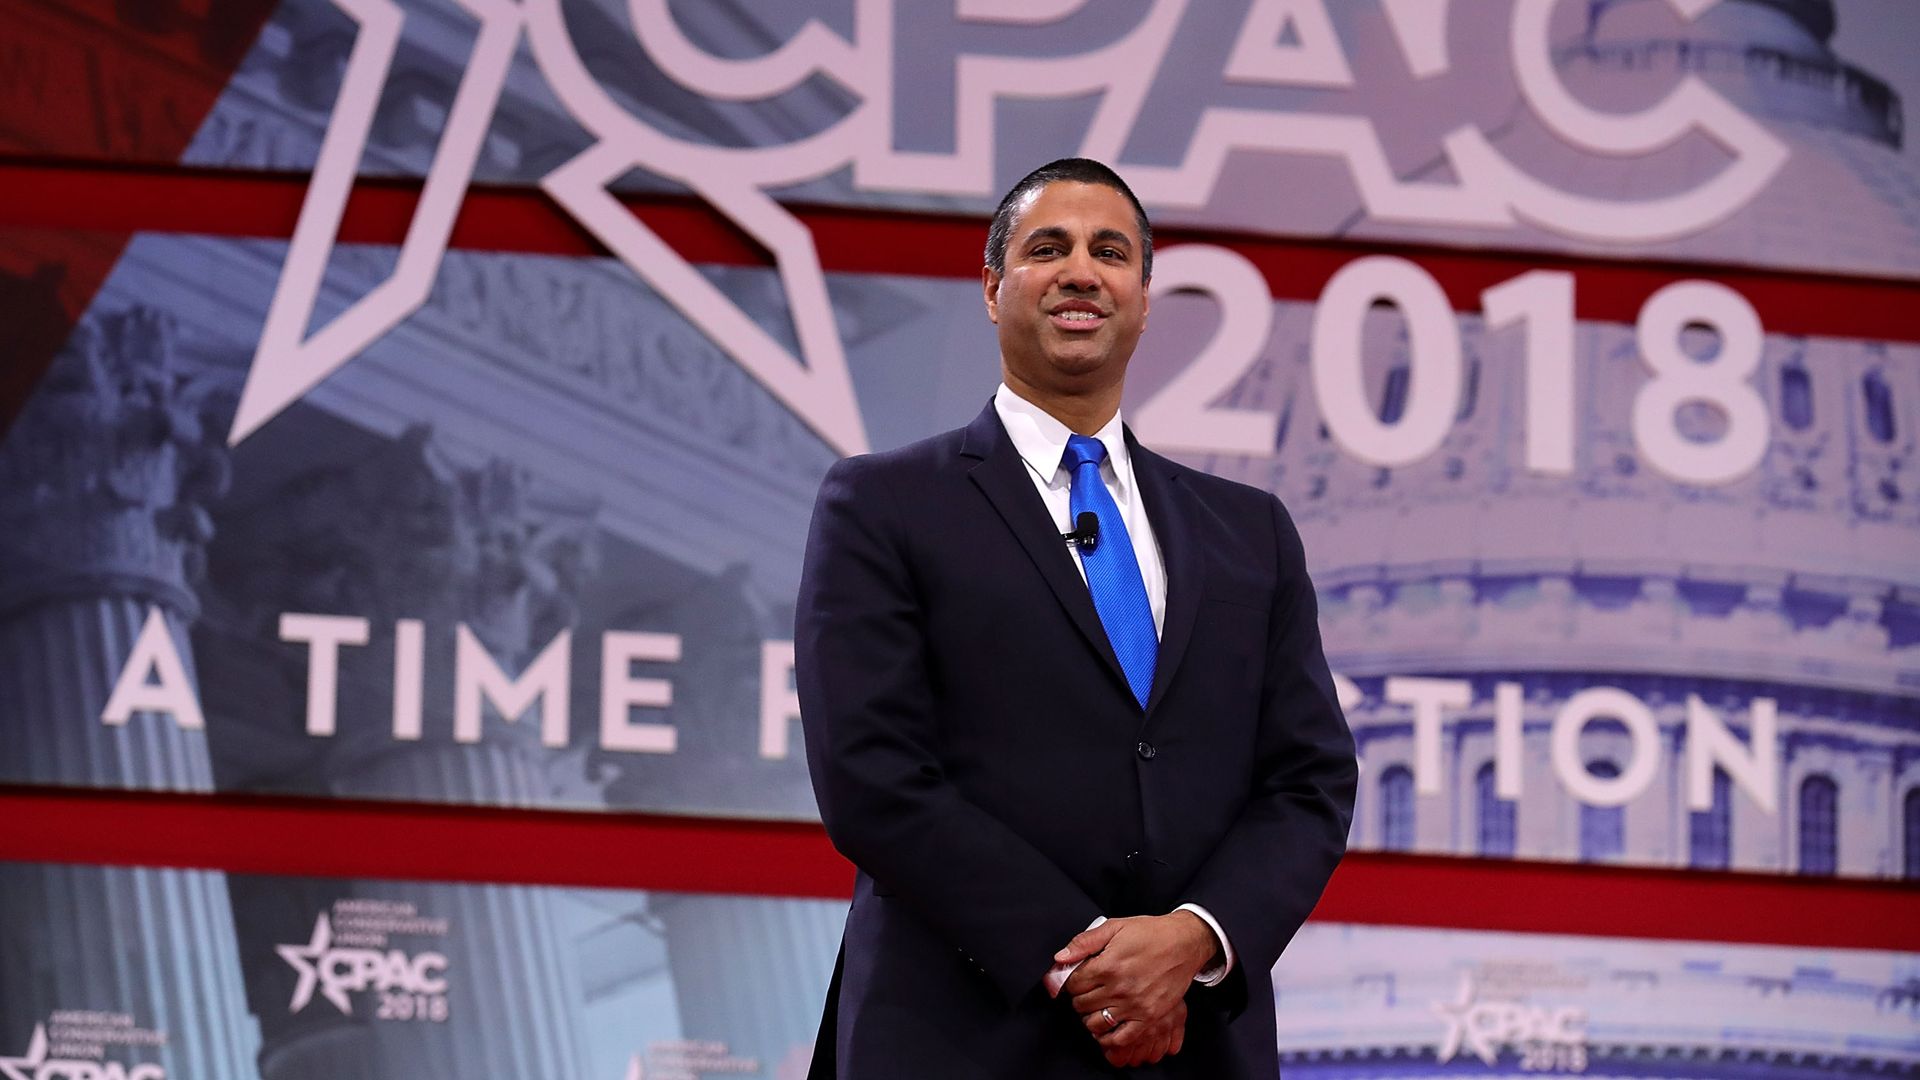 Ajit Pai stands in front of a CPAC sign with his hands clasped